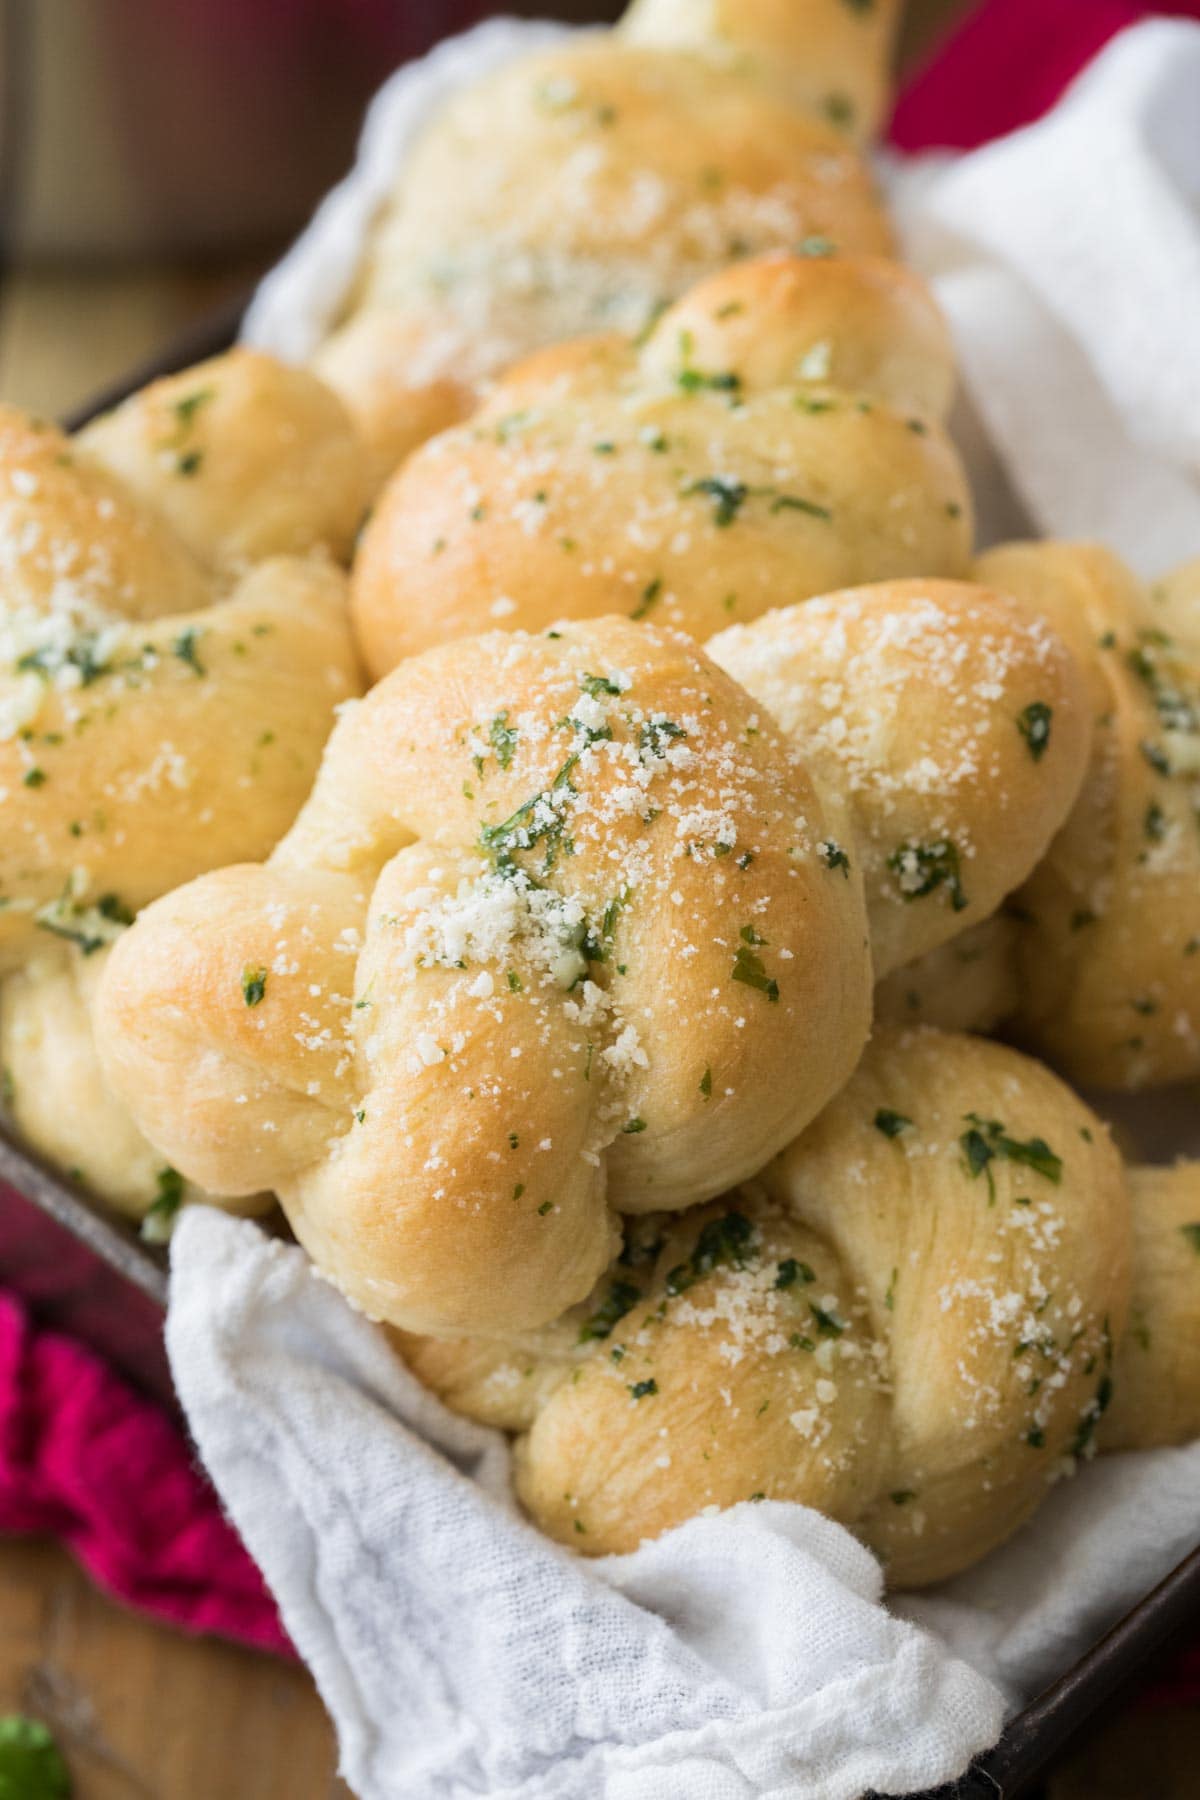 Parmesan and herb coated bread knots in a pile.